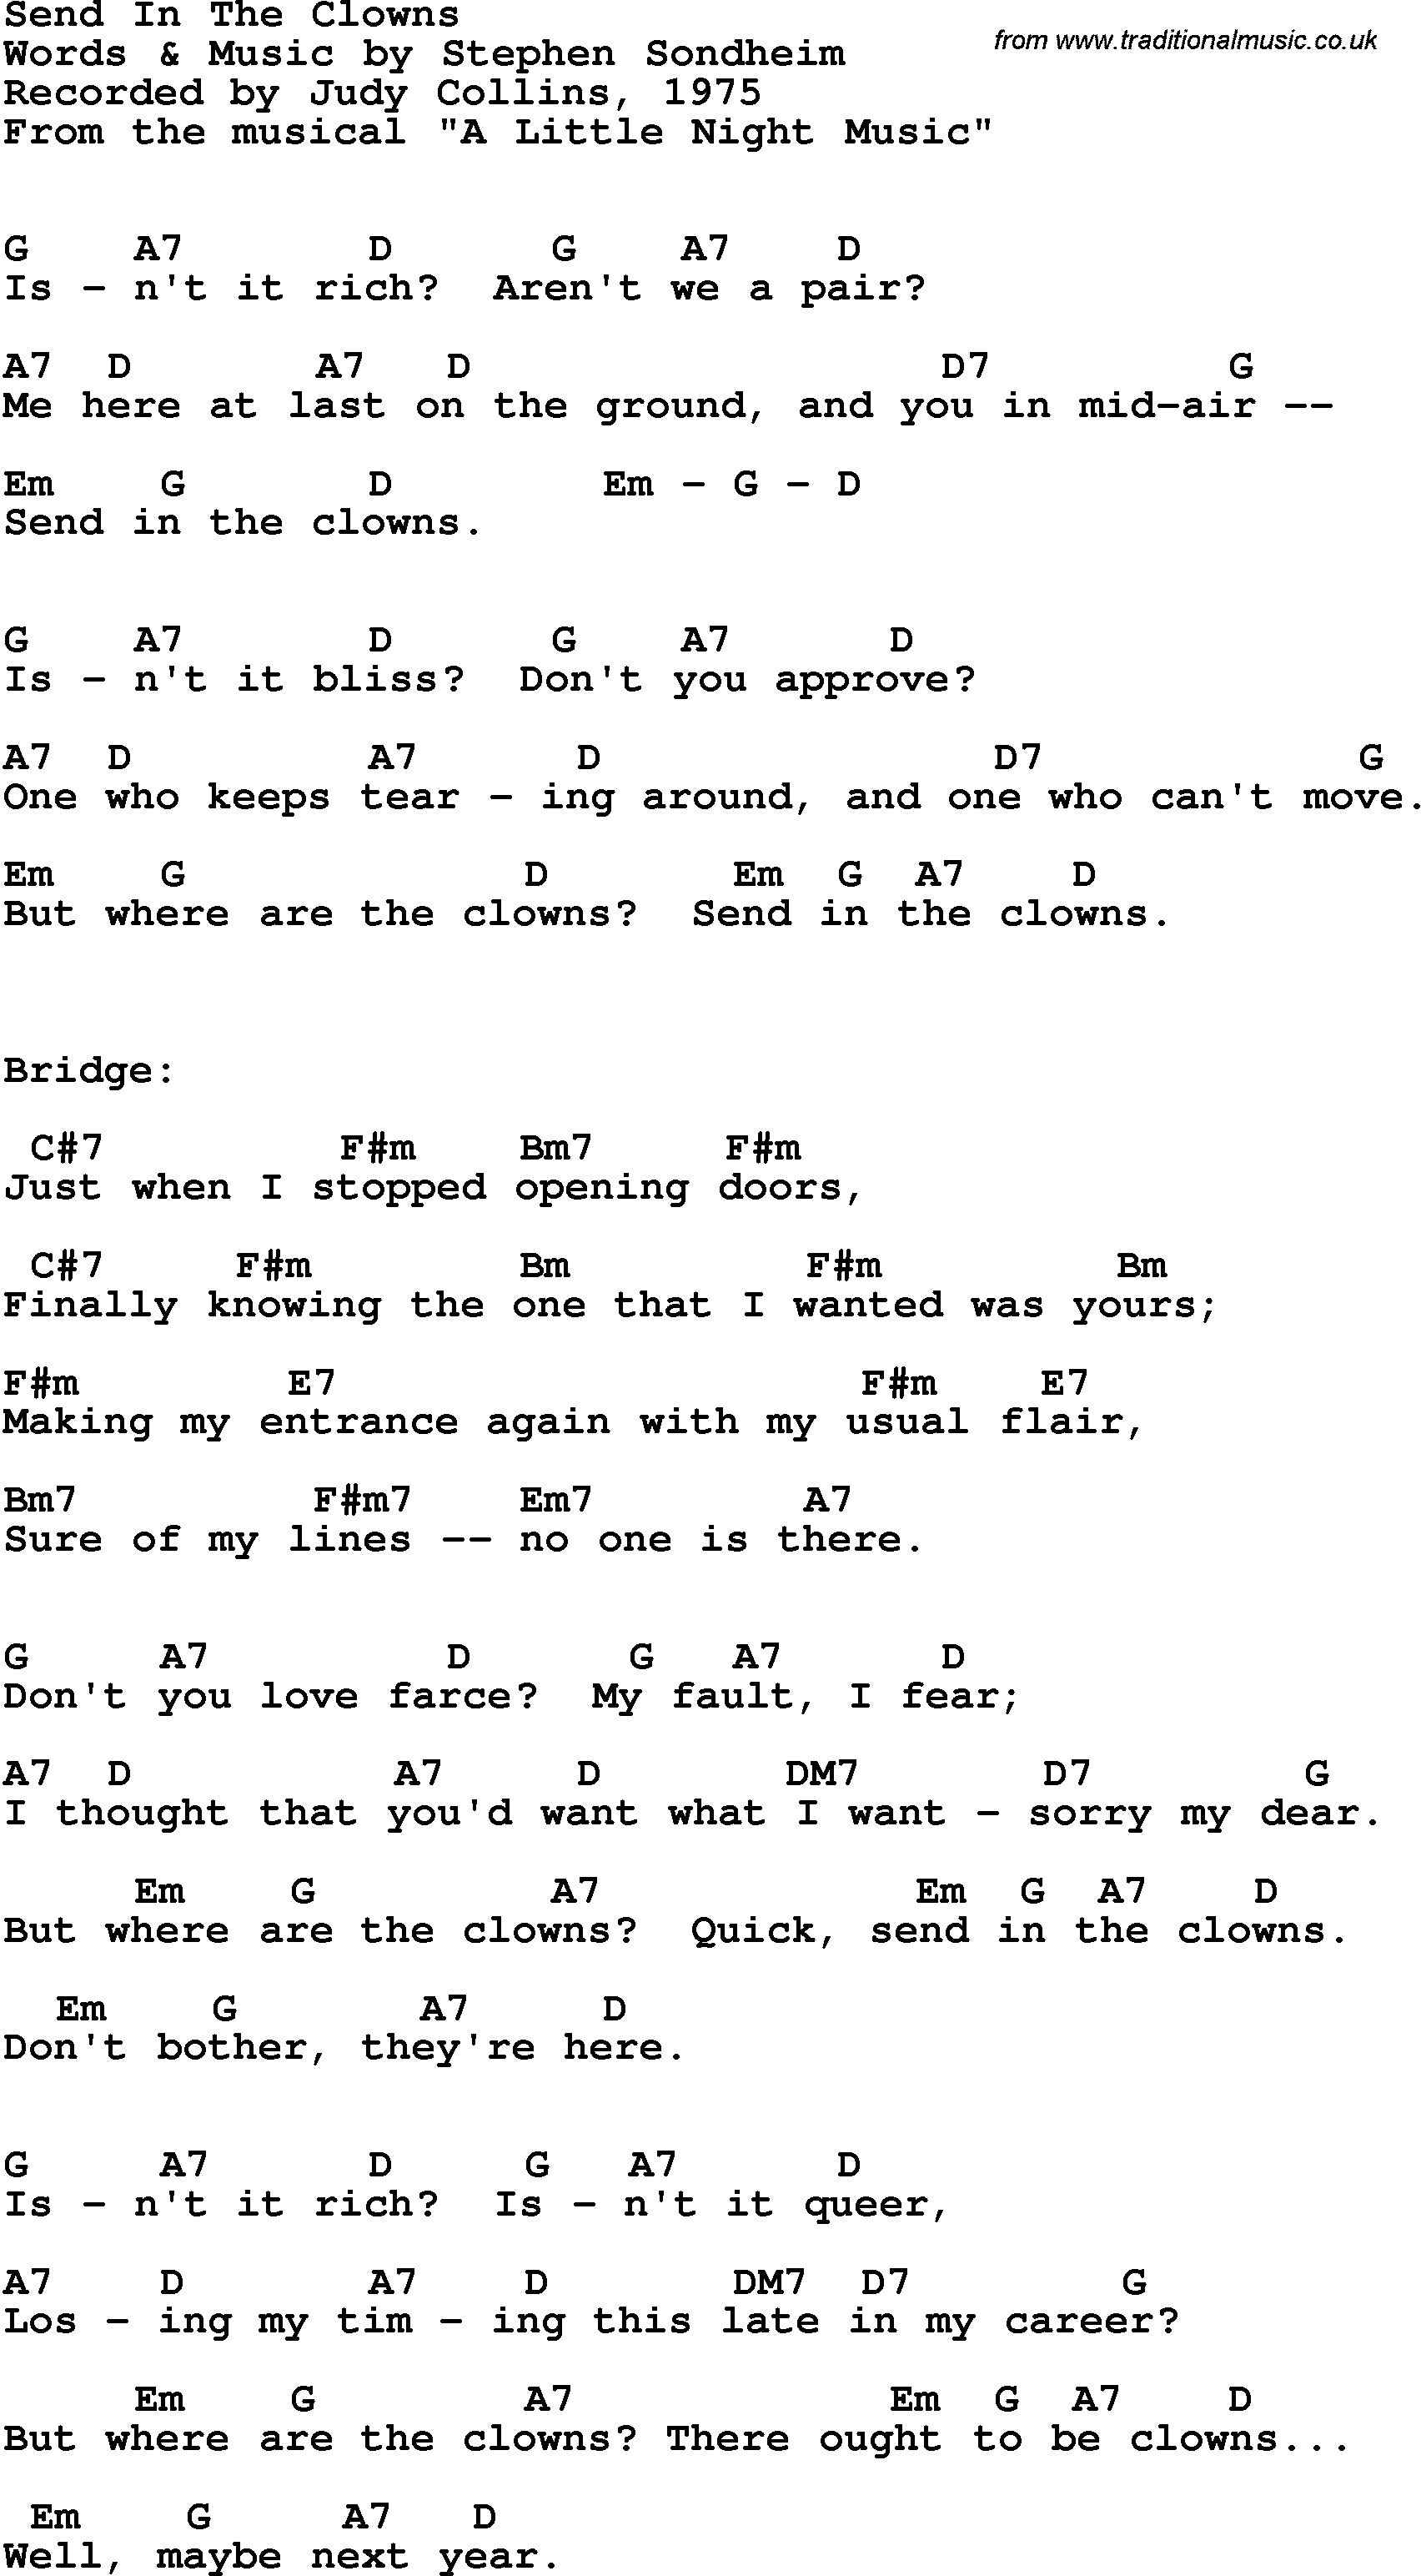 Song Lyrics with guitar chords for Send In The Clowns - Judy Collins, 1975